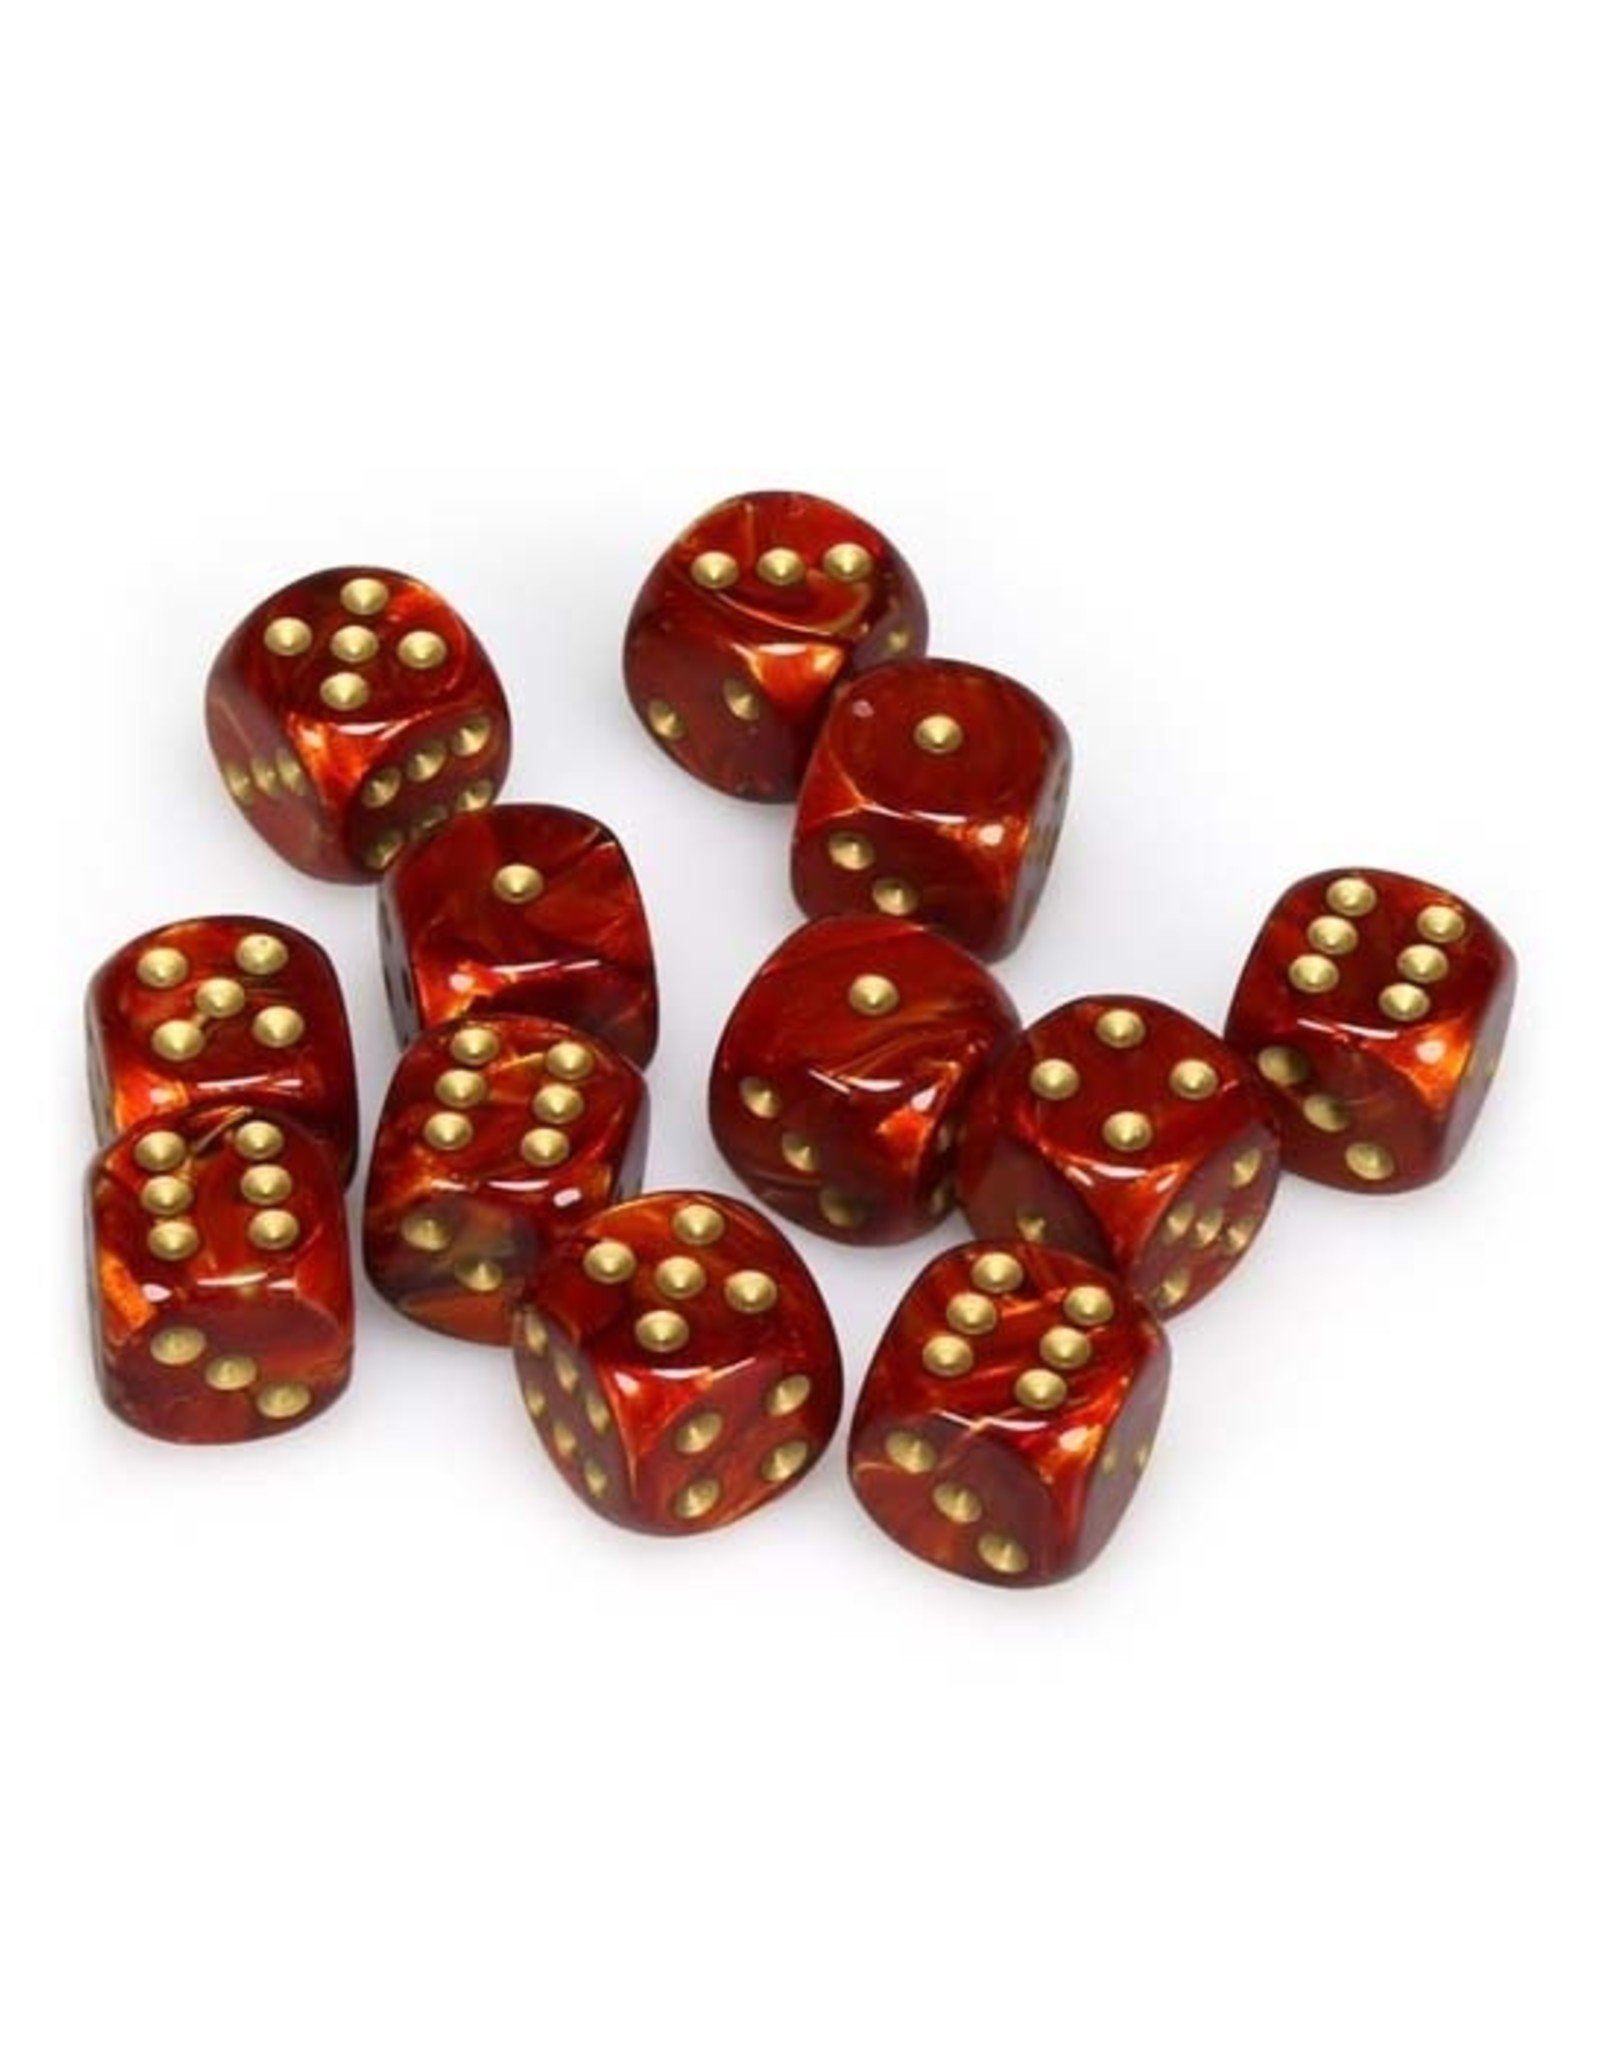 Chessex Chessex: 16mm D6 - Scarab - Scarlet w/ Gold